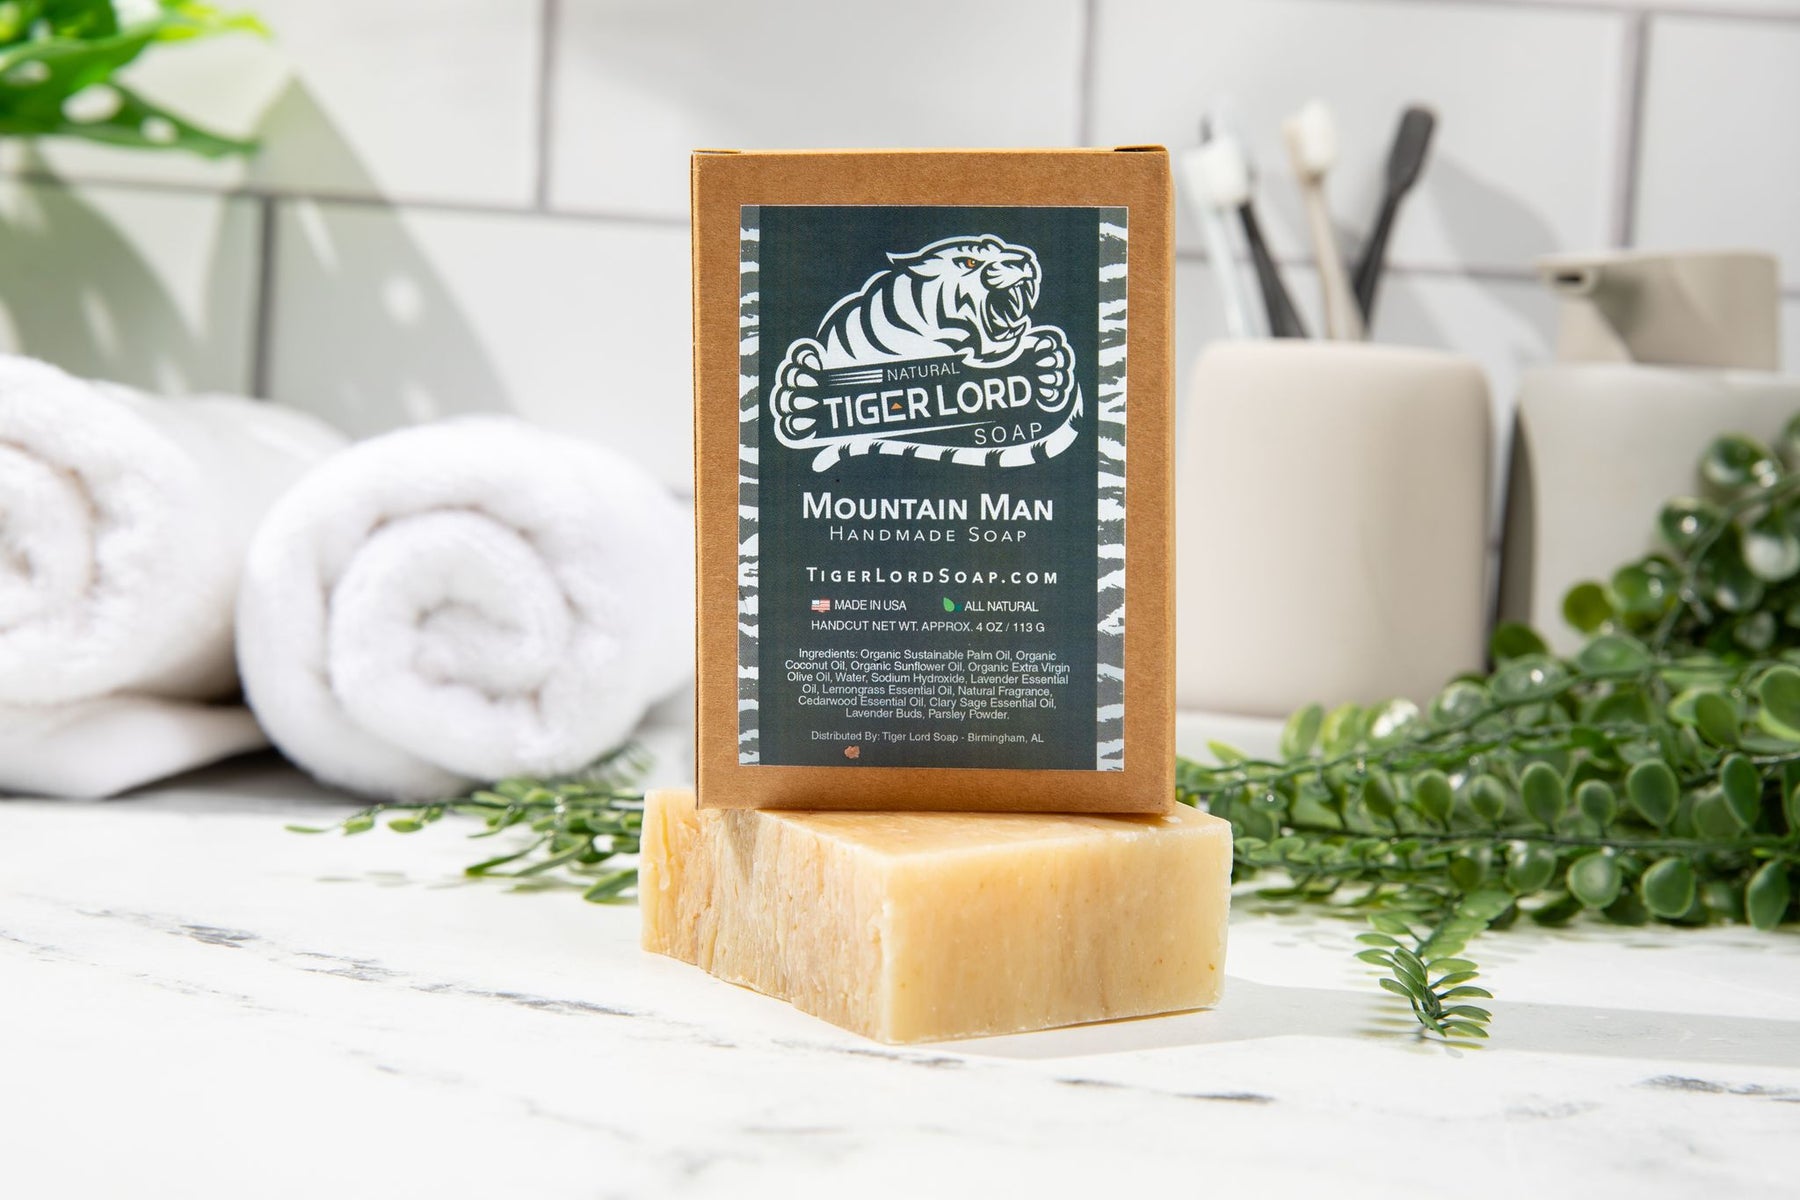 All Things Herbal Limited - Handcrafted Natural Soap - handcrafted